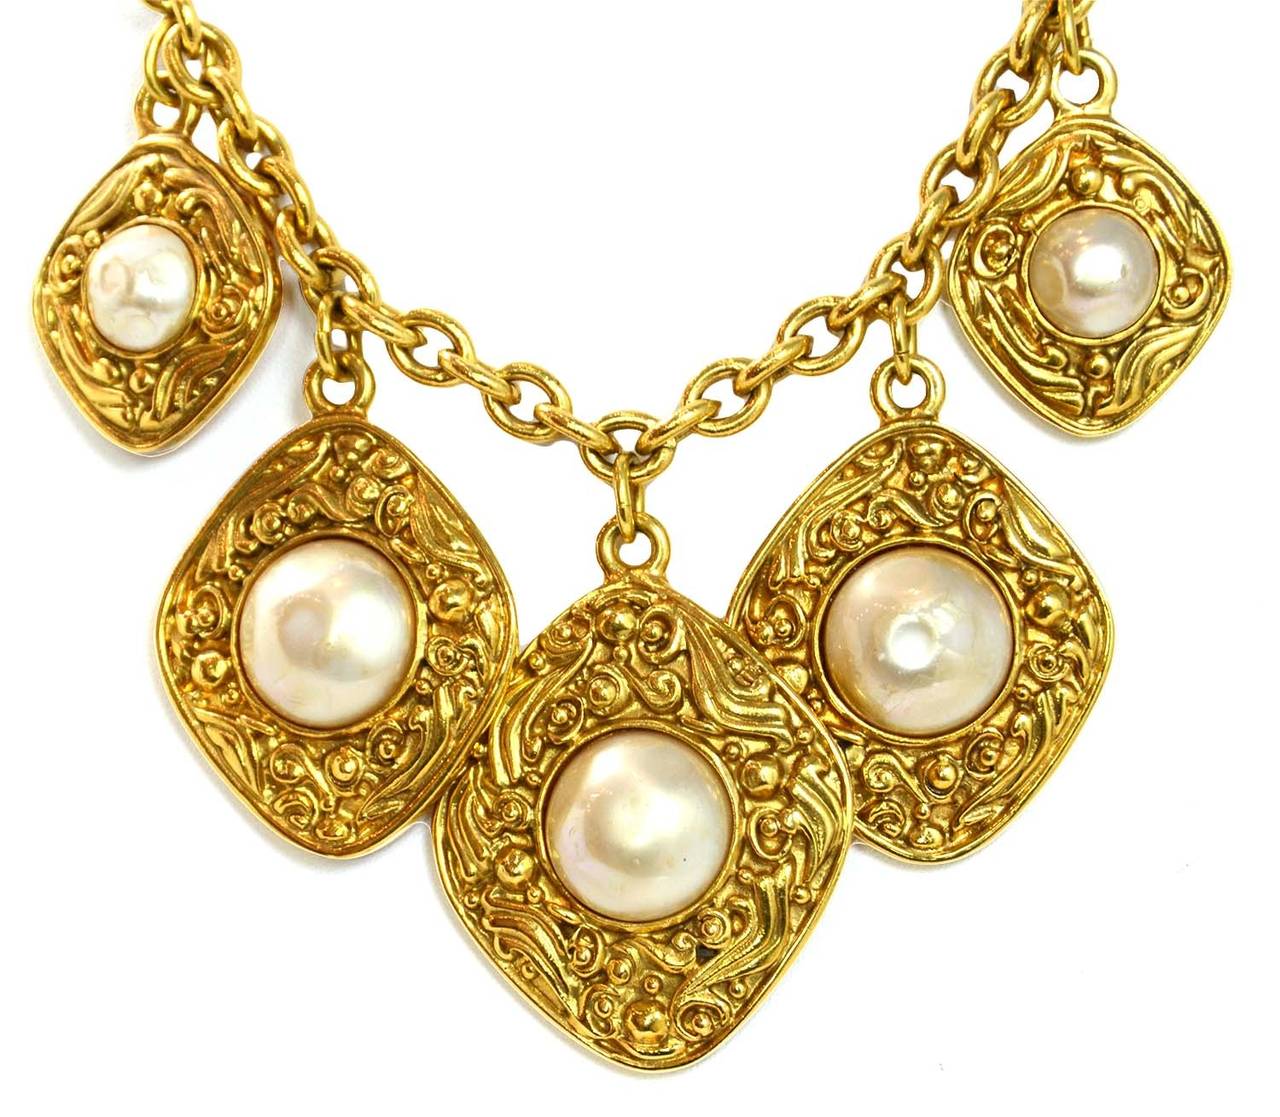 Chanel Vintage 90's Gold Necklace w/5 Hanging Gold & Pearl PendantsFeatures intricate detailing to goldtone diamond pendants

    Made in: France
    Year of Production: 1990's
    Stamp: CHANEL CC MADE IN FRANCE
    Closure: Jump ring